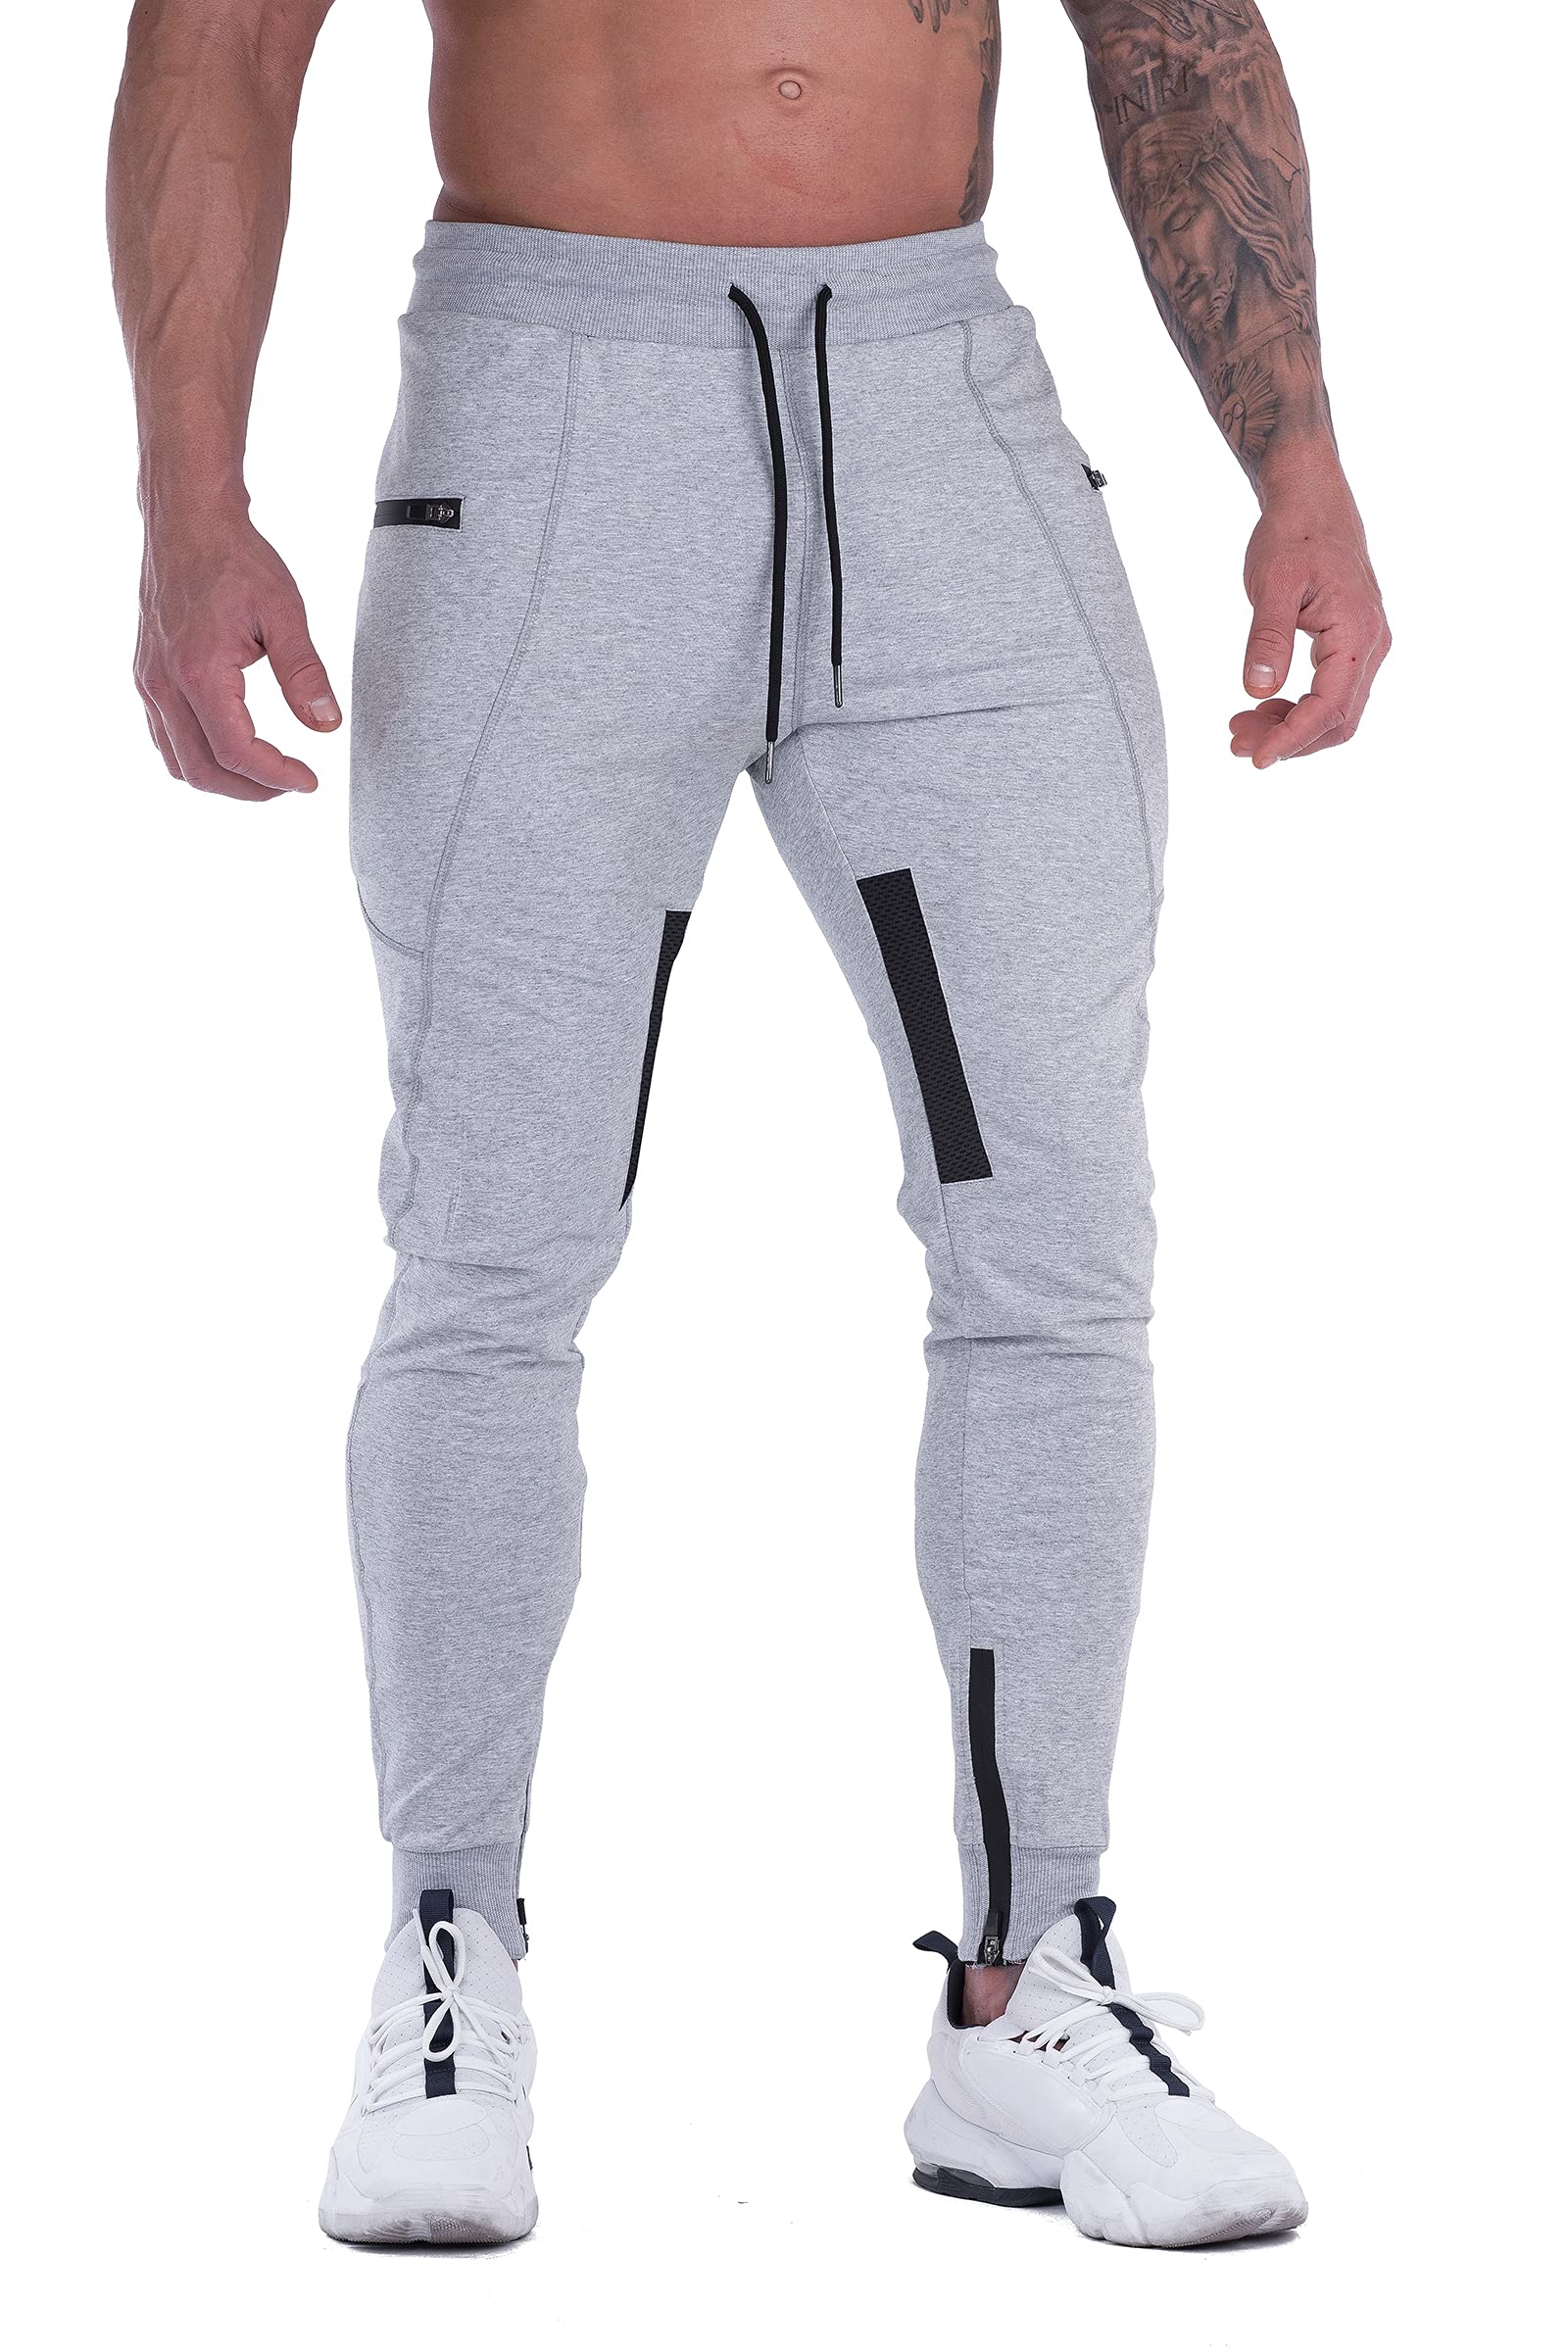 FIRSTGYM Mens Joggers Sweatpants Slim Fit Workout Training Thigh Mesh Gym  Jogger Pants with Zipper Pockets Light Grey Large